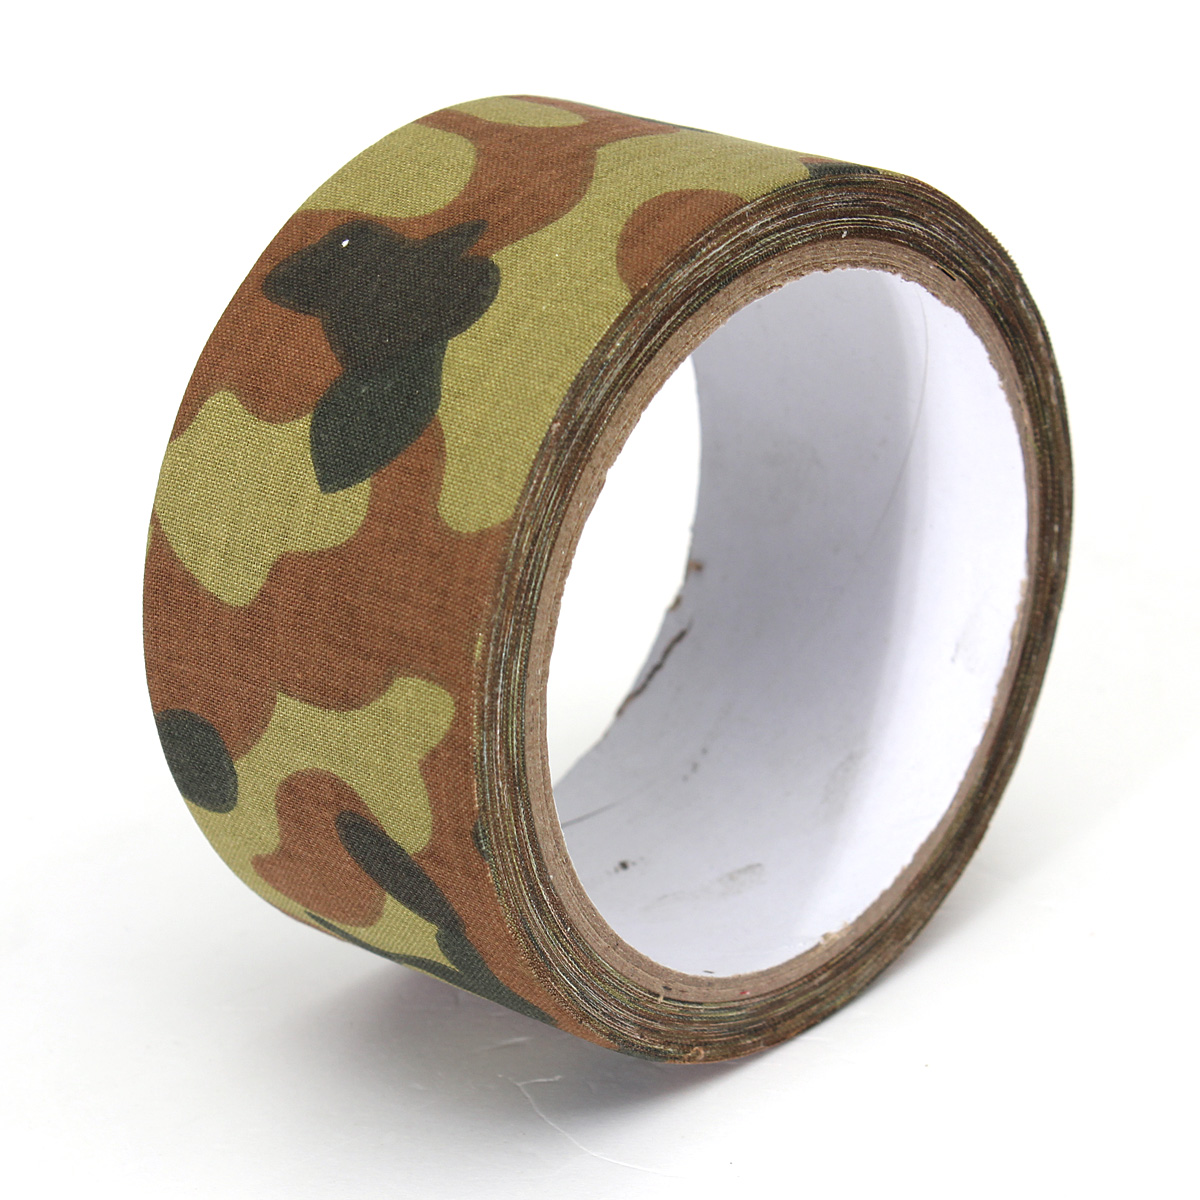 10M-Camouflage-Wrap-Tape-Camo-Tape-Duct-Waterproof-Mutifunctional-Fabric-Camping-Stealth-Tape-1310100-2